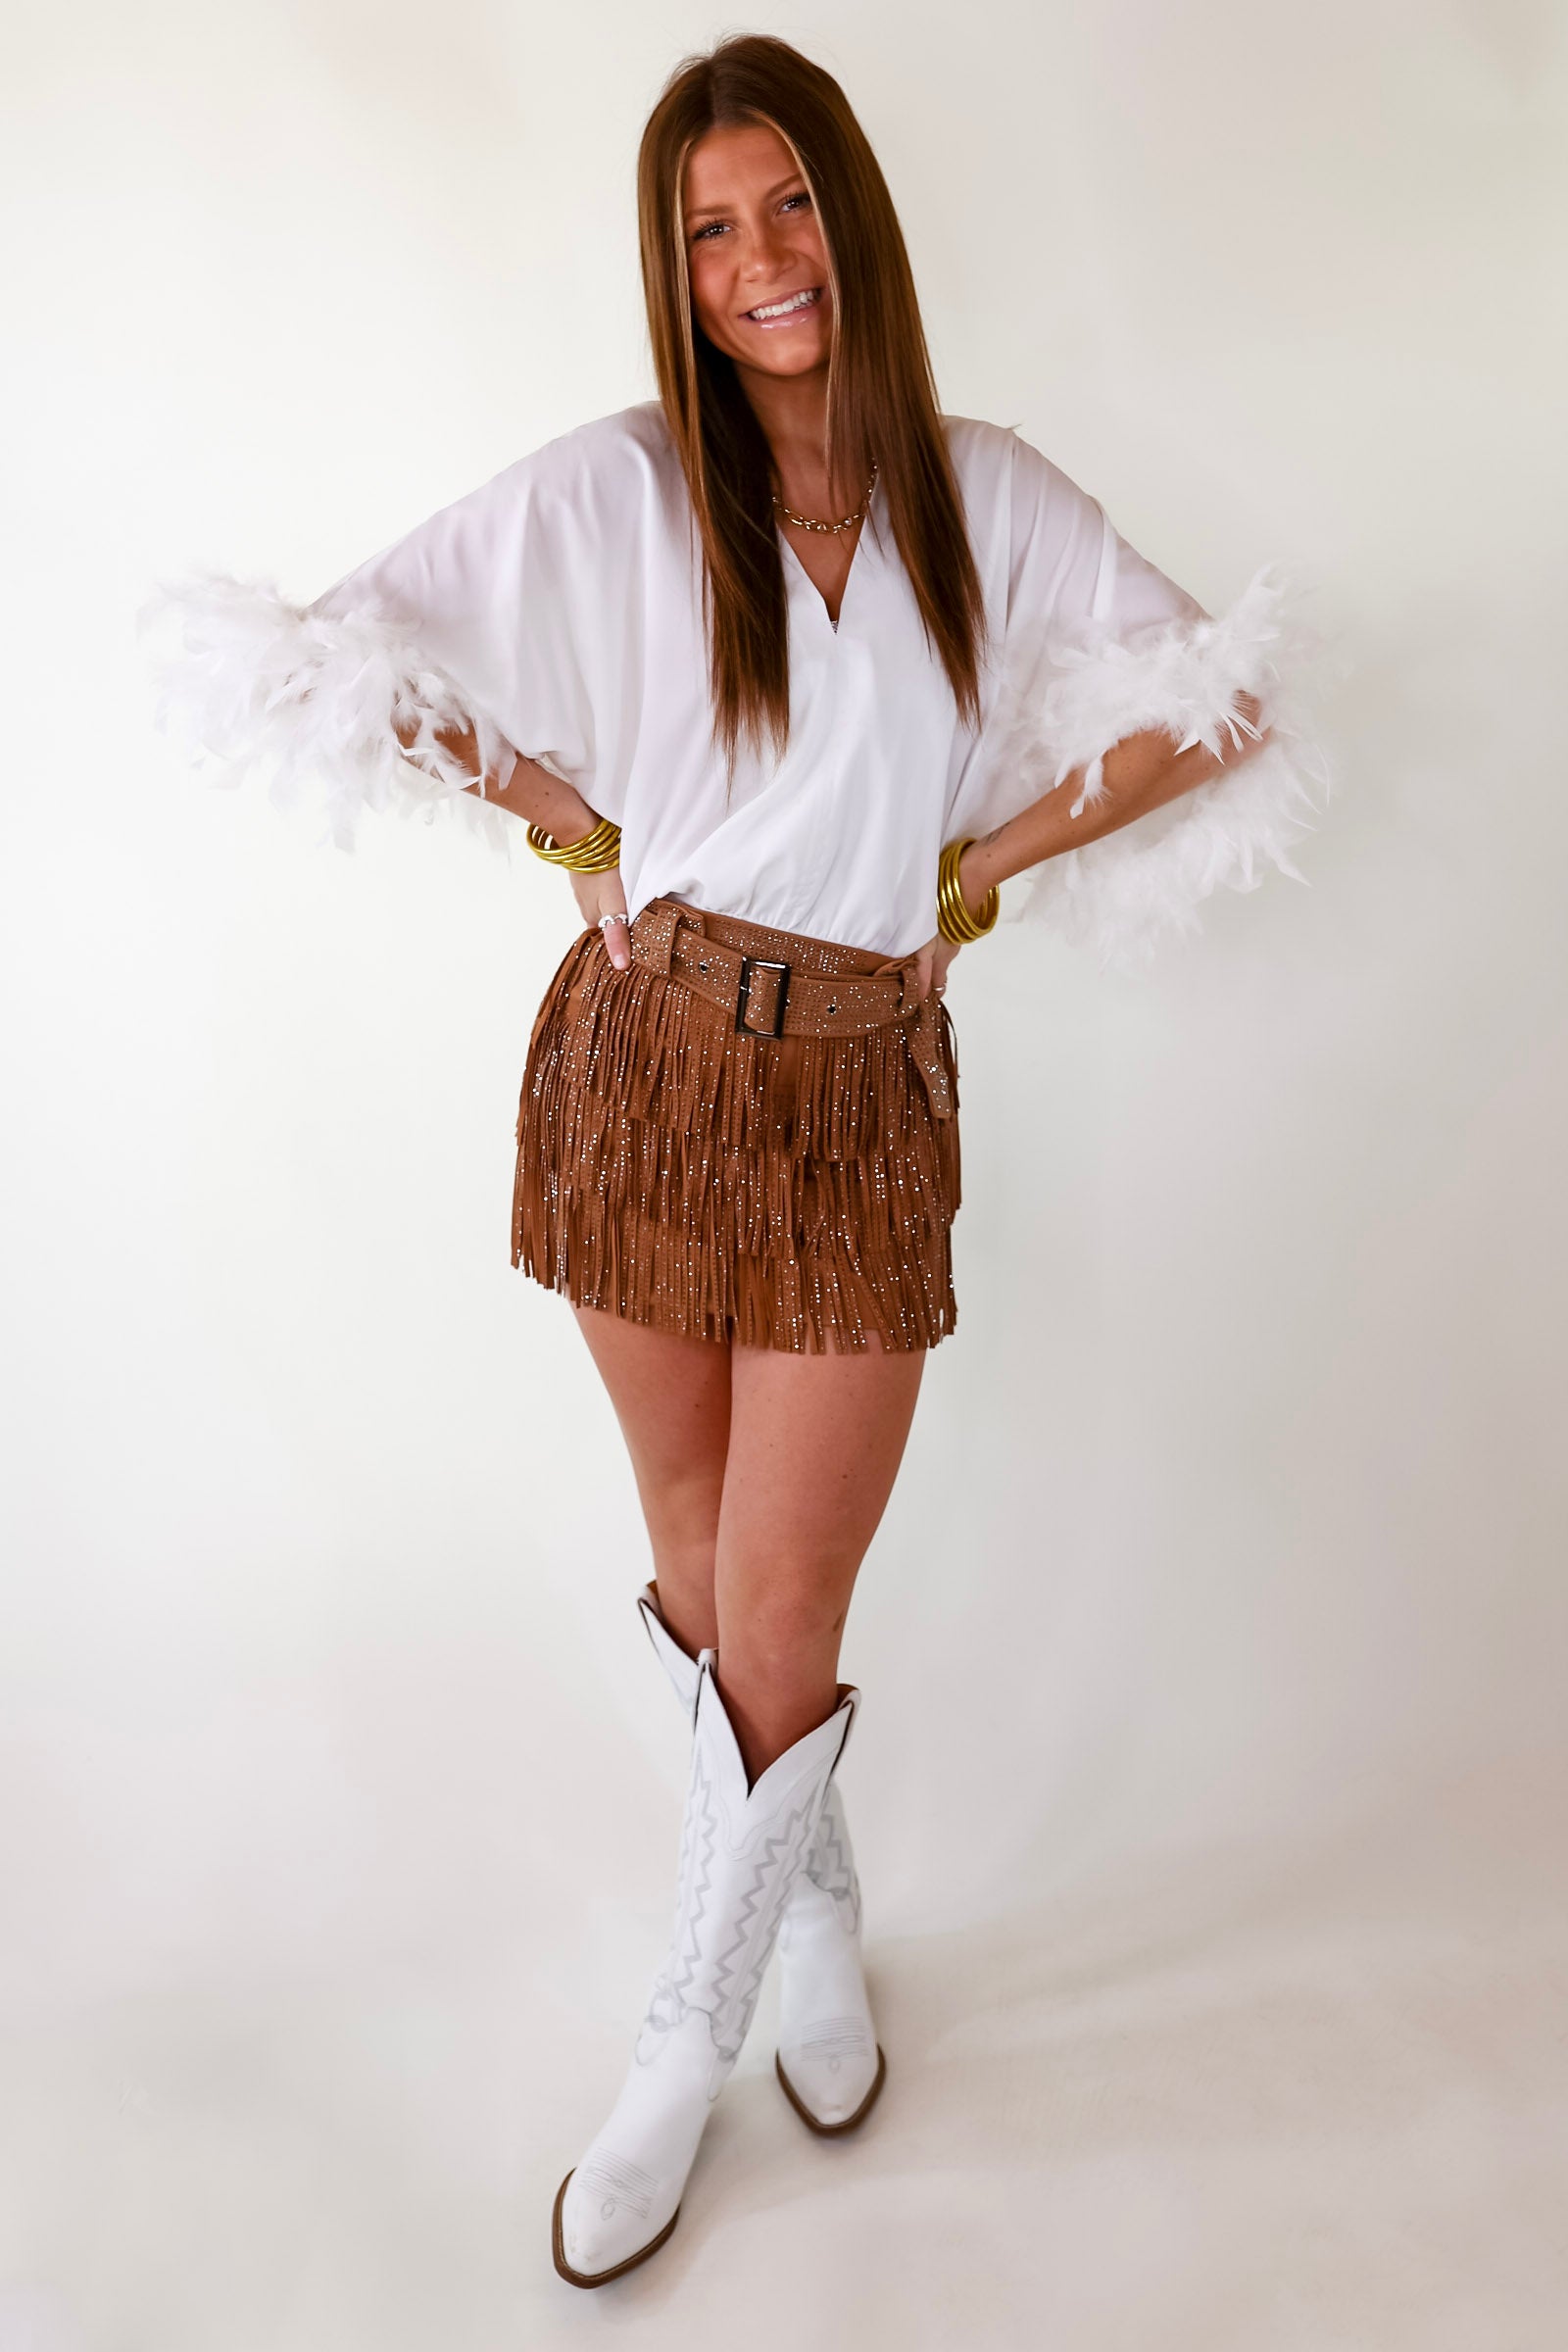 Party Plans V Neck Bodysuit with Feather Sleeves in White - Giddy Up Glamour Boutique